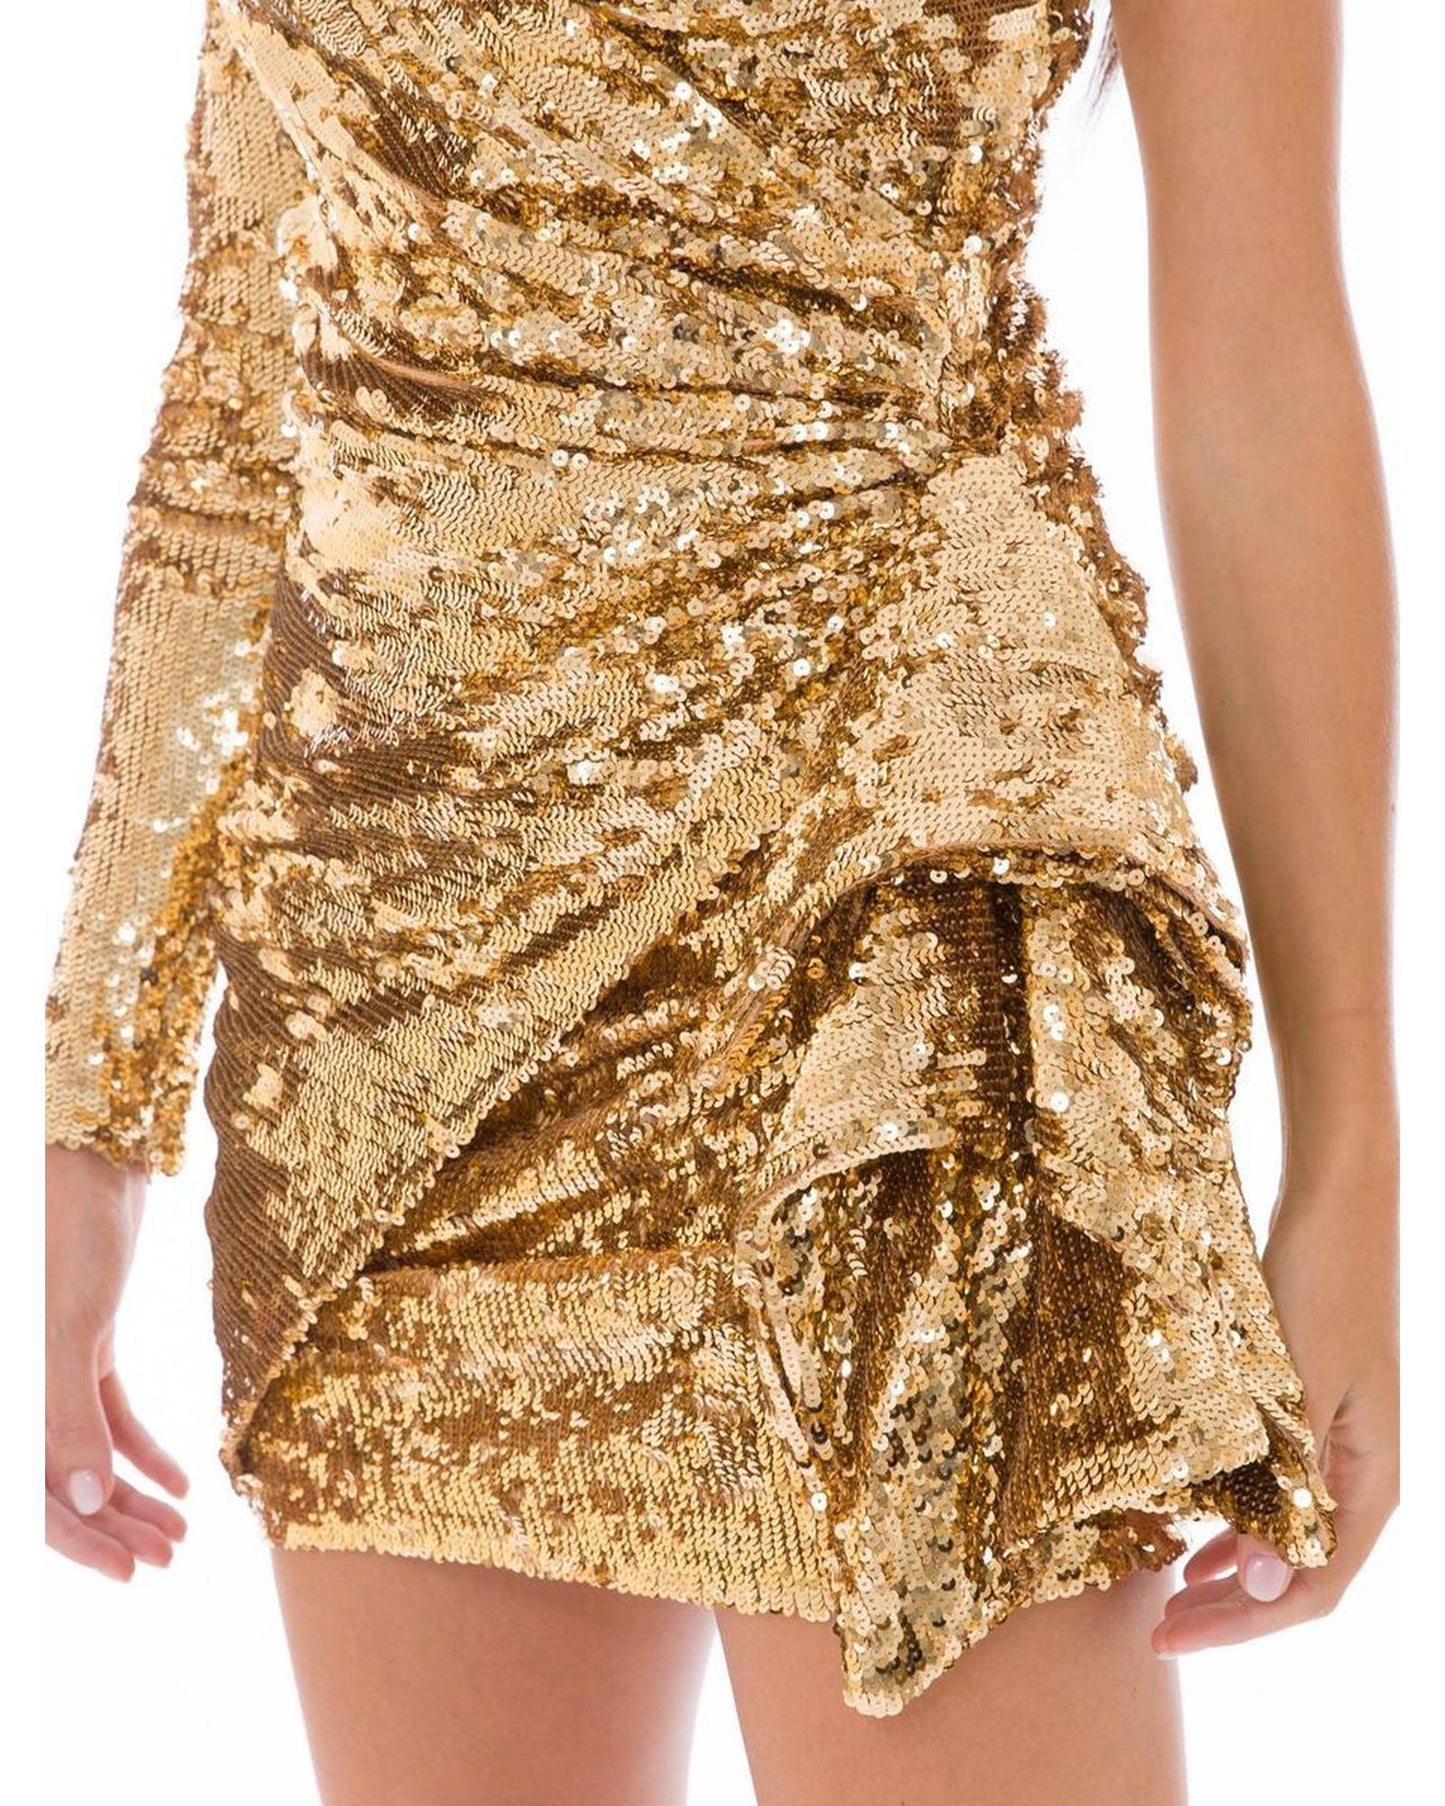 Sequined Gold Dress with Flake Detail and Back Zip Closure 40 IT Women